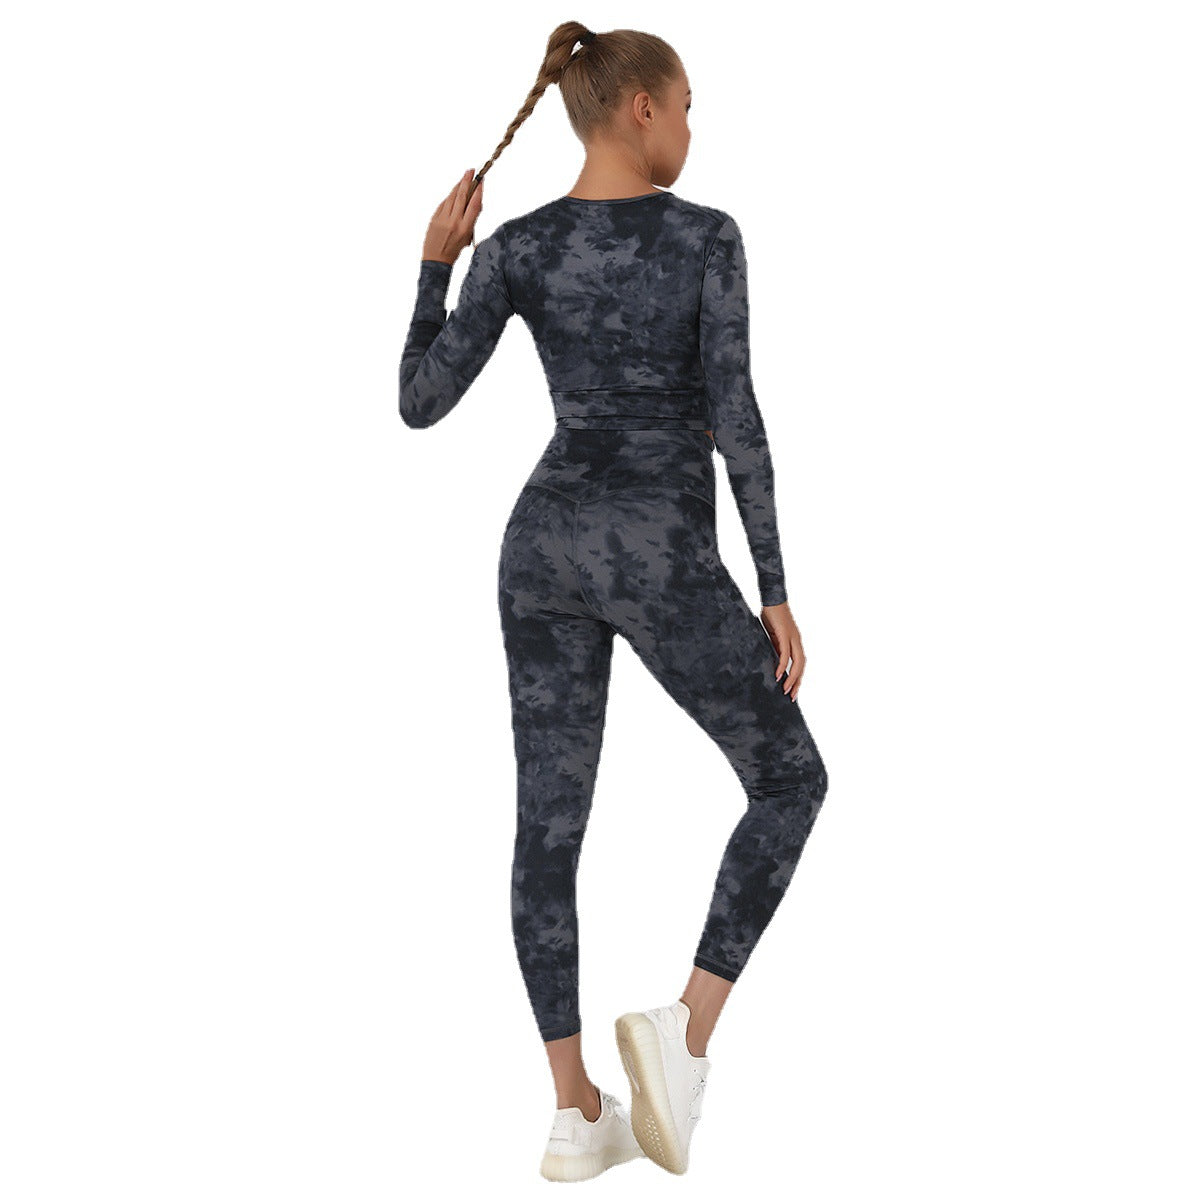 New Tie Dye Yoga Clothes Nude Sanding Sports Long Sleeve Fitness Sports Trousers Yoga Fitness Women's Suit